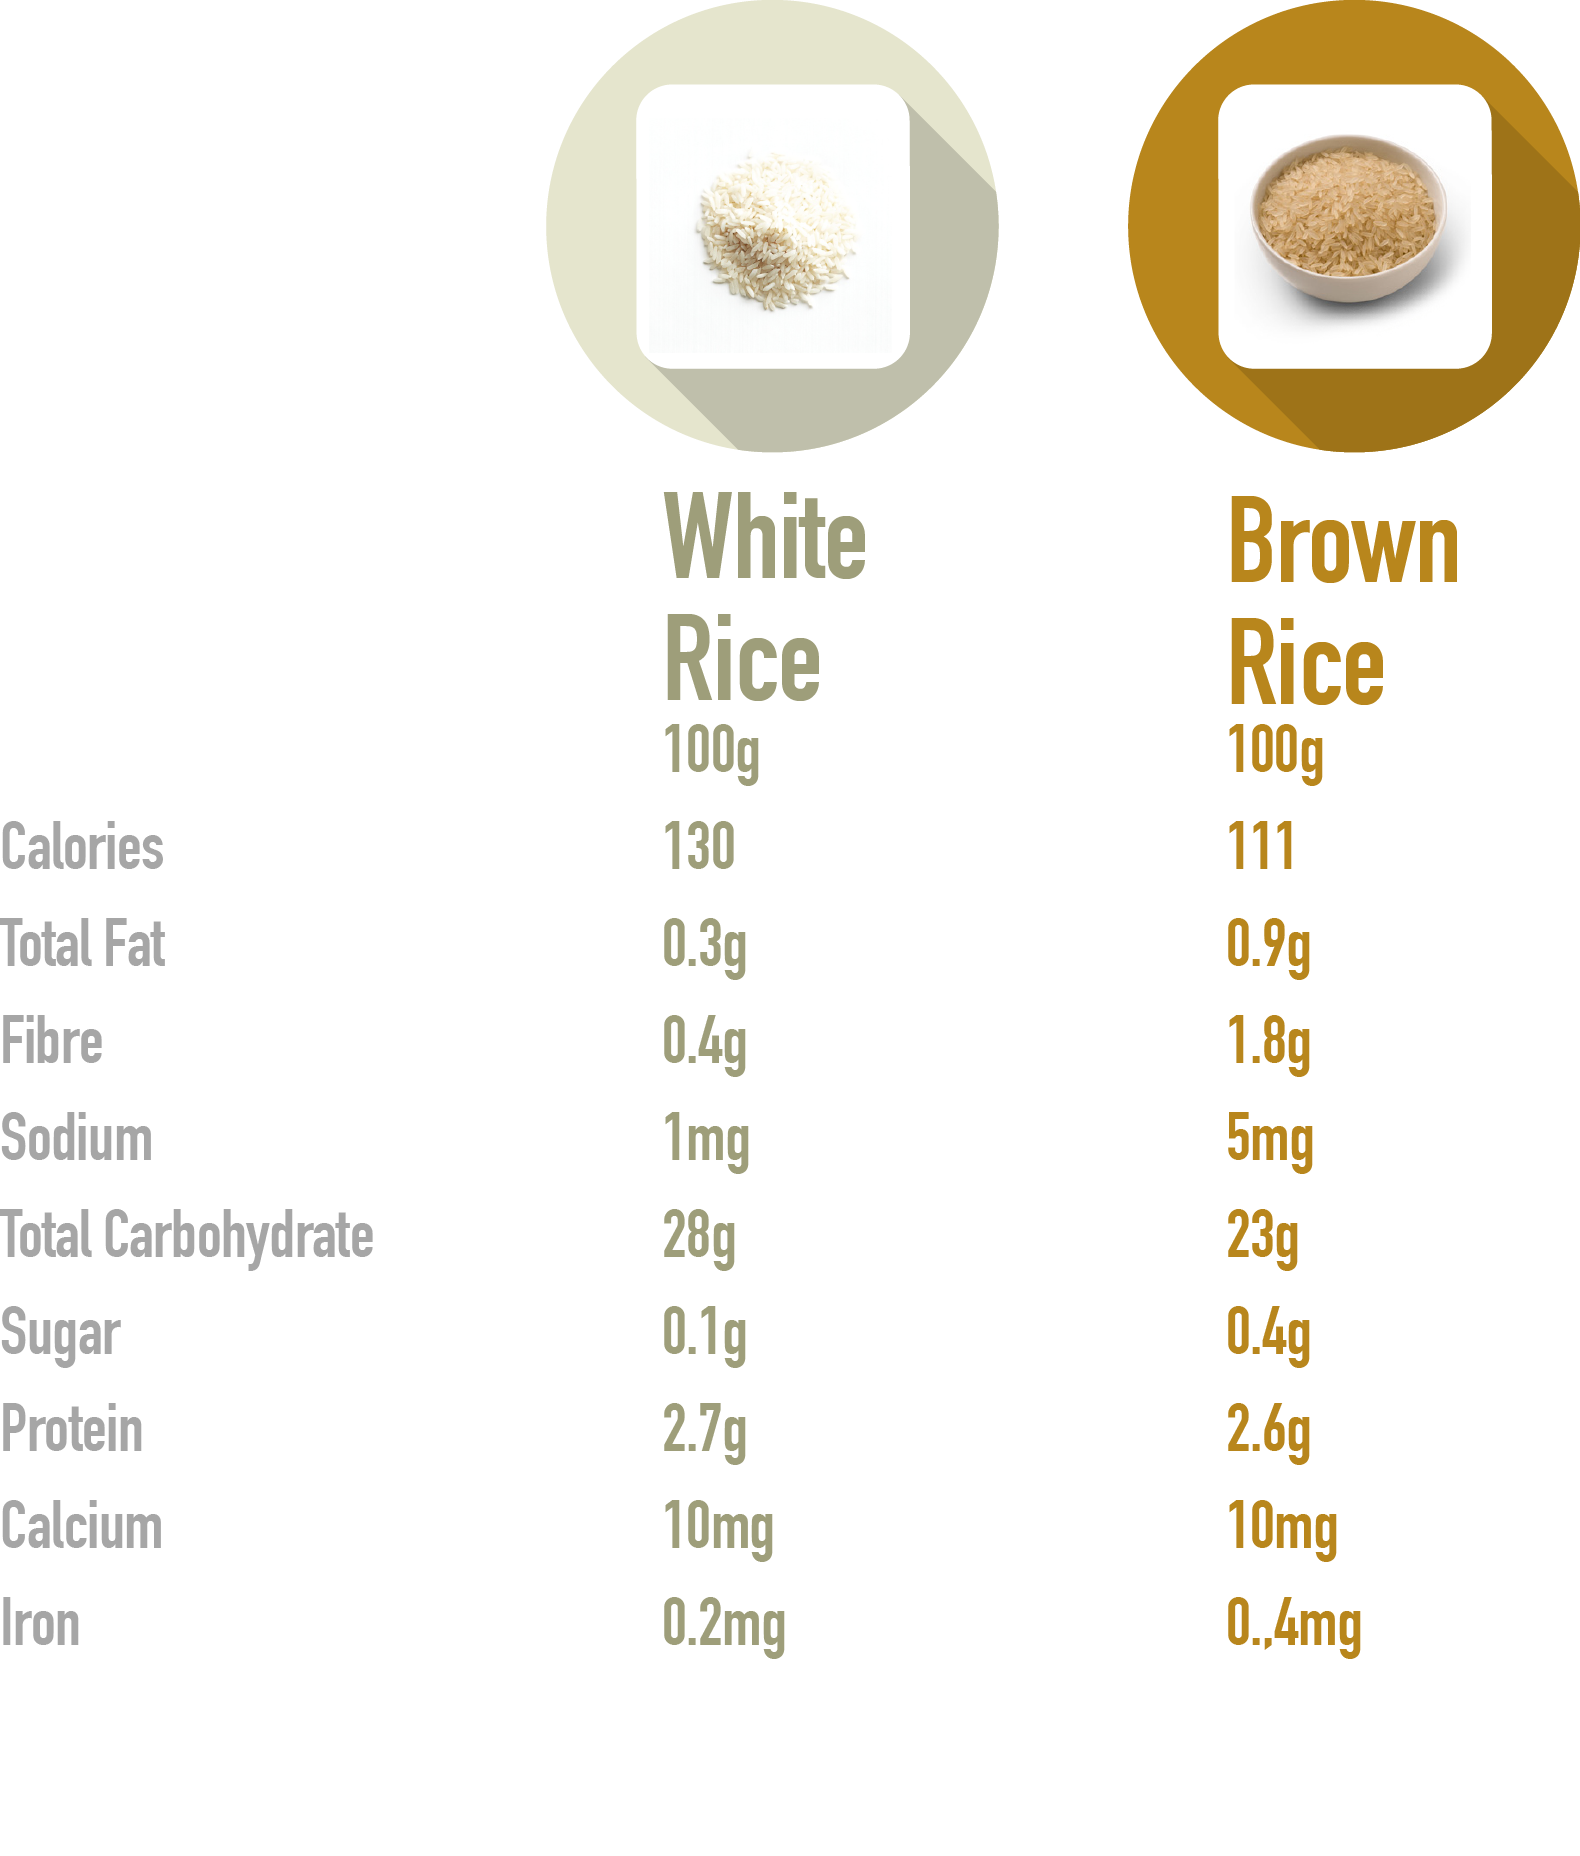 Brown-rice-and-white-rice-nutritional-values